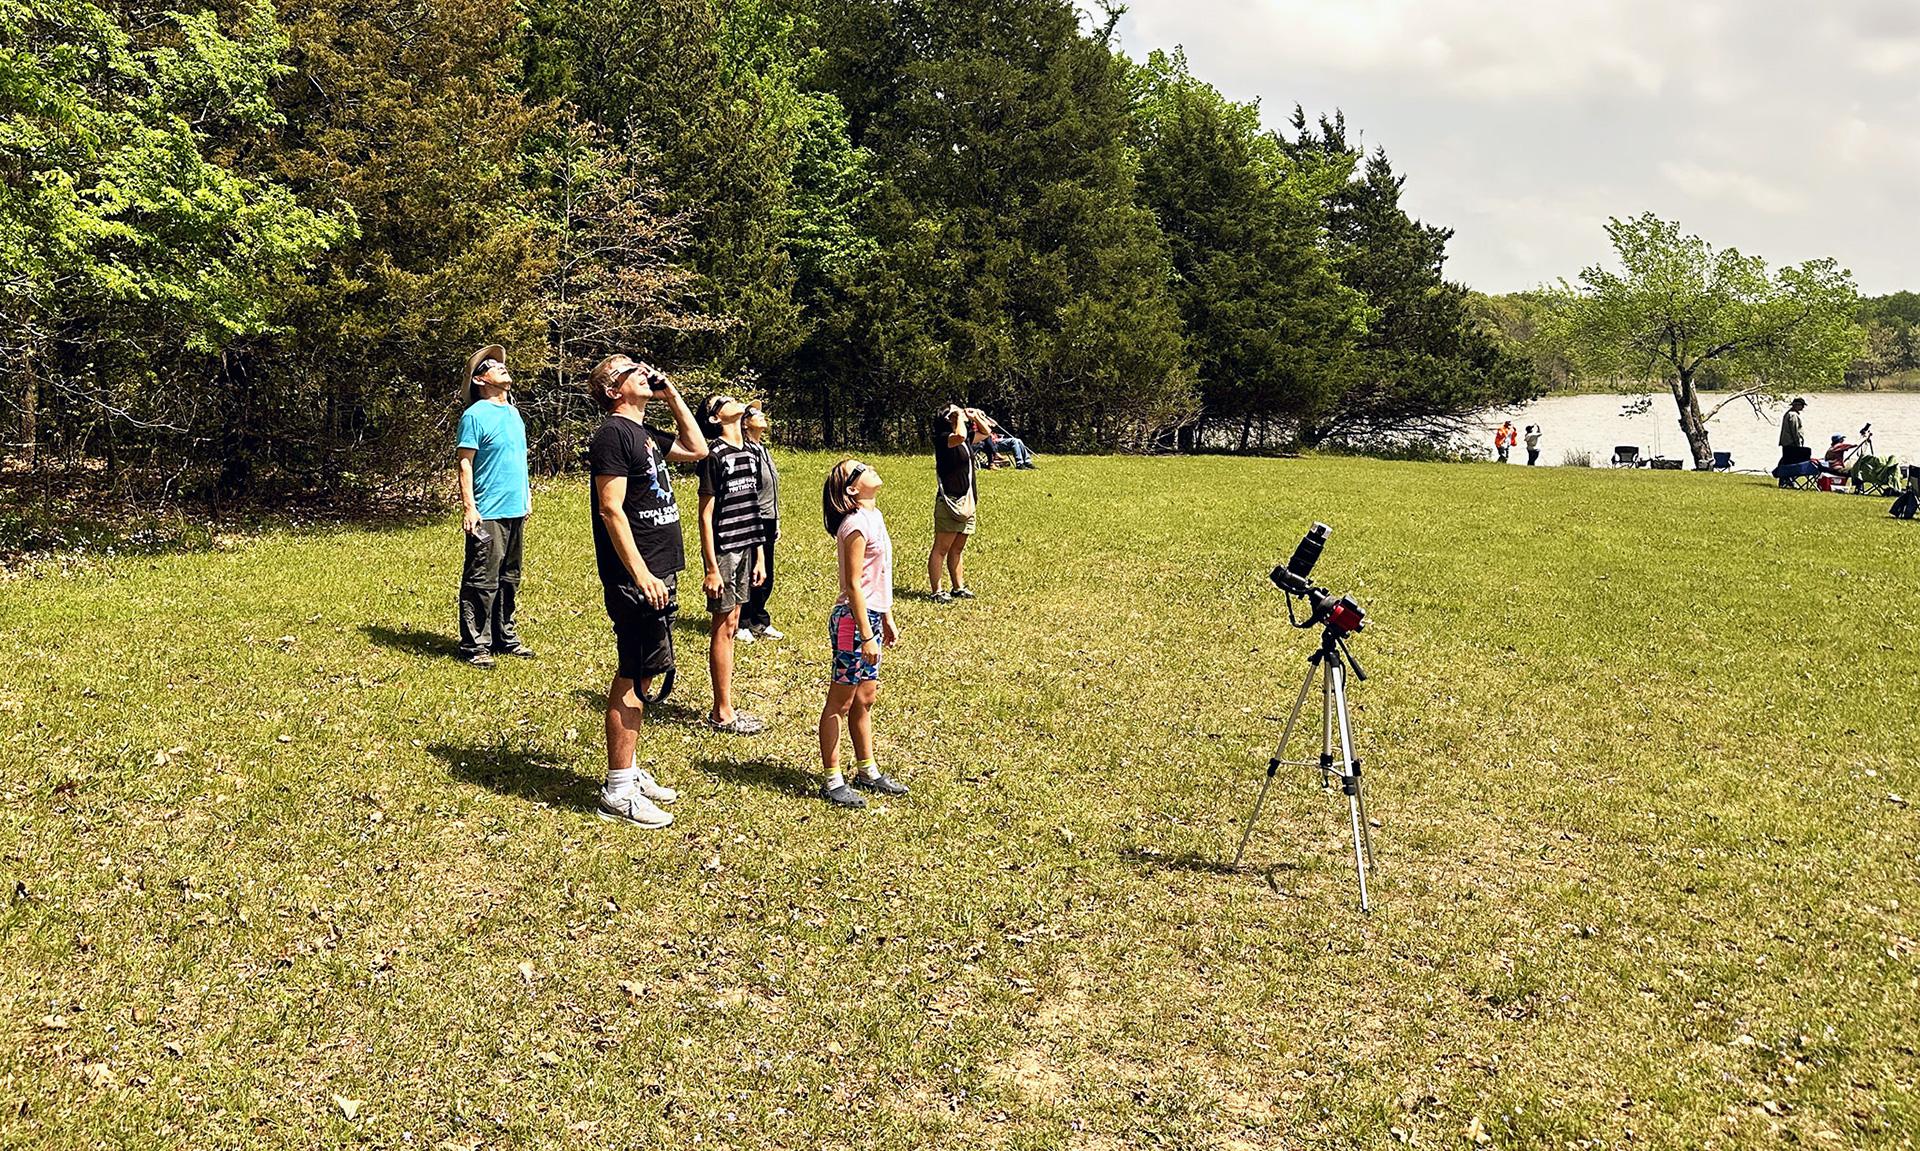 Children wearing Eclipse-viewing glasses while standing on a grassy plain, looking at the sky where the solar eclipse is happening.